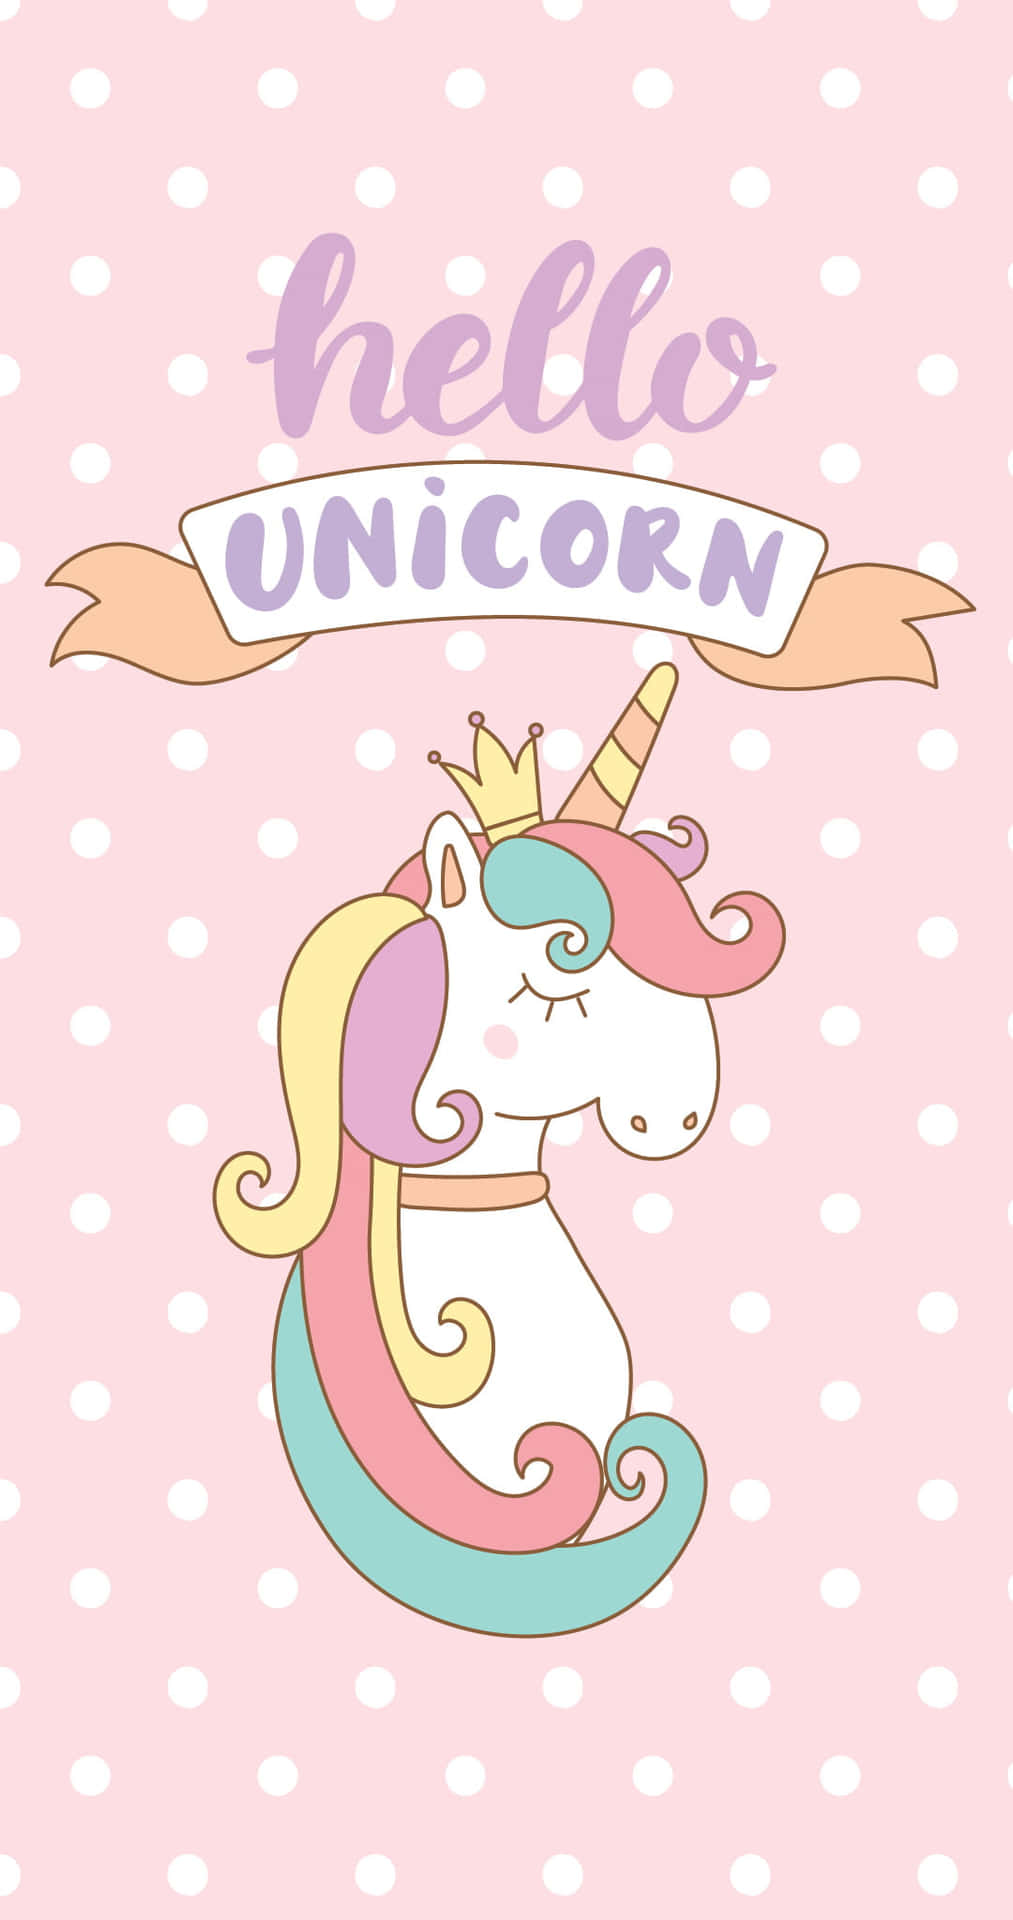 Cute Unicorn with Dreamy Pastel Colors Wallpaper